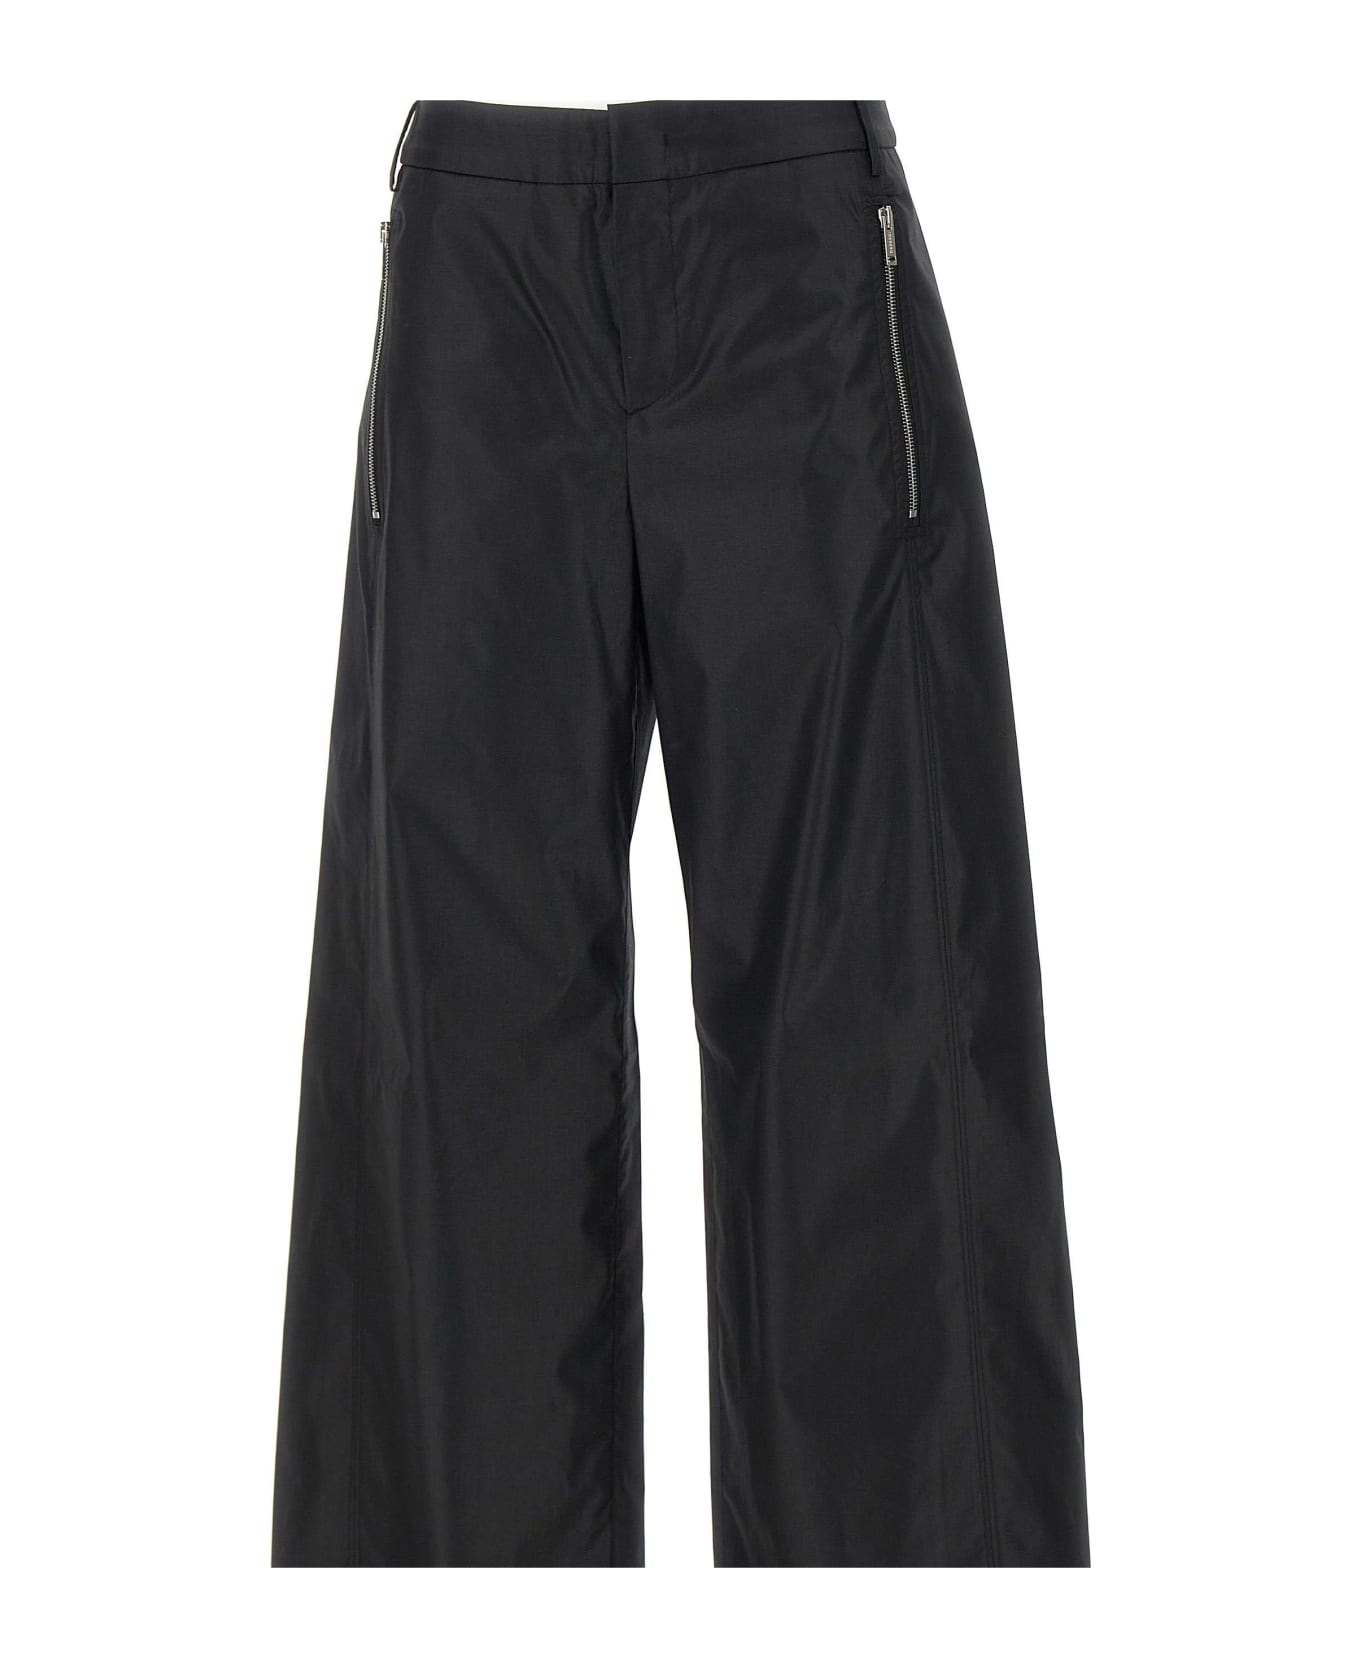 Iceberg Cinched Cotton Adorable trousers - BLACK